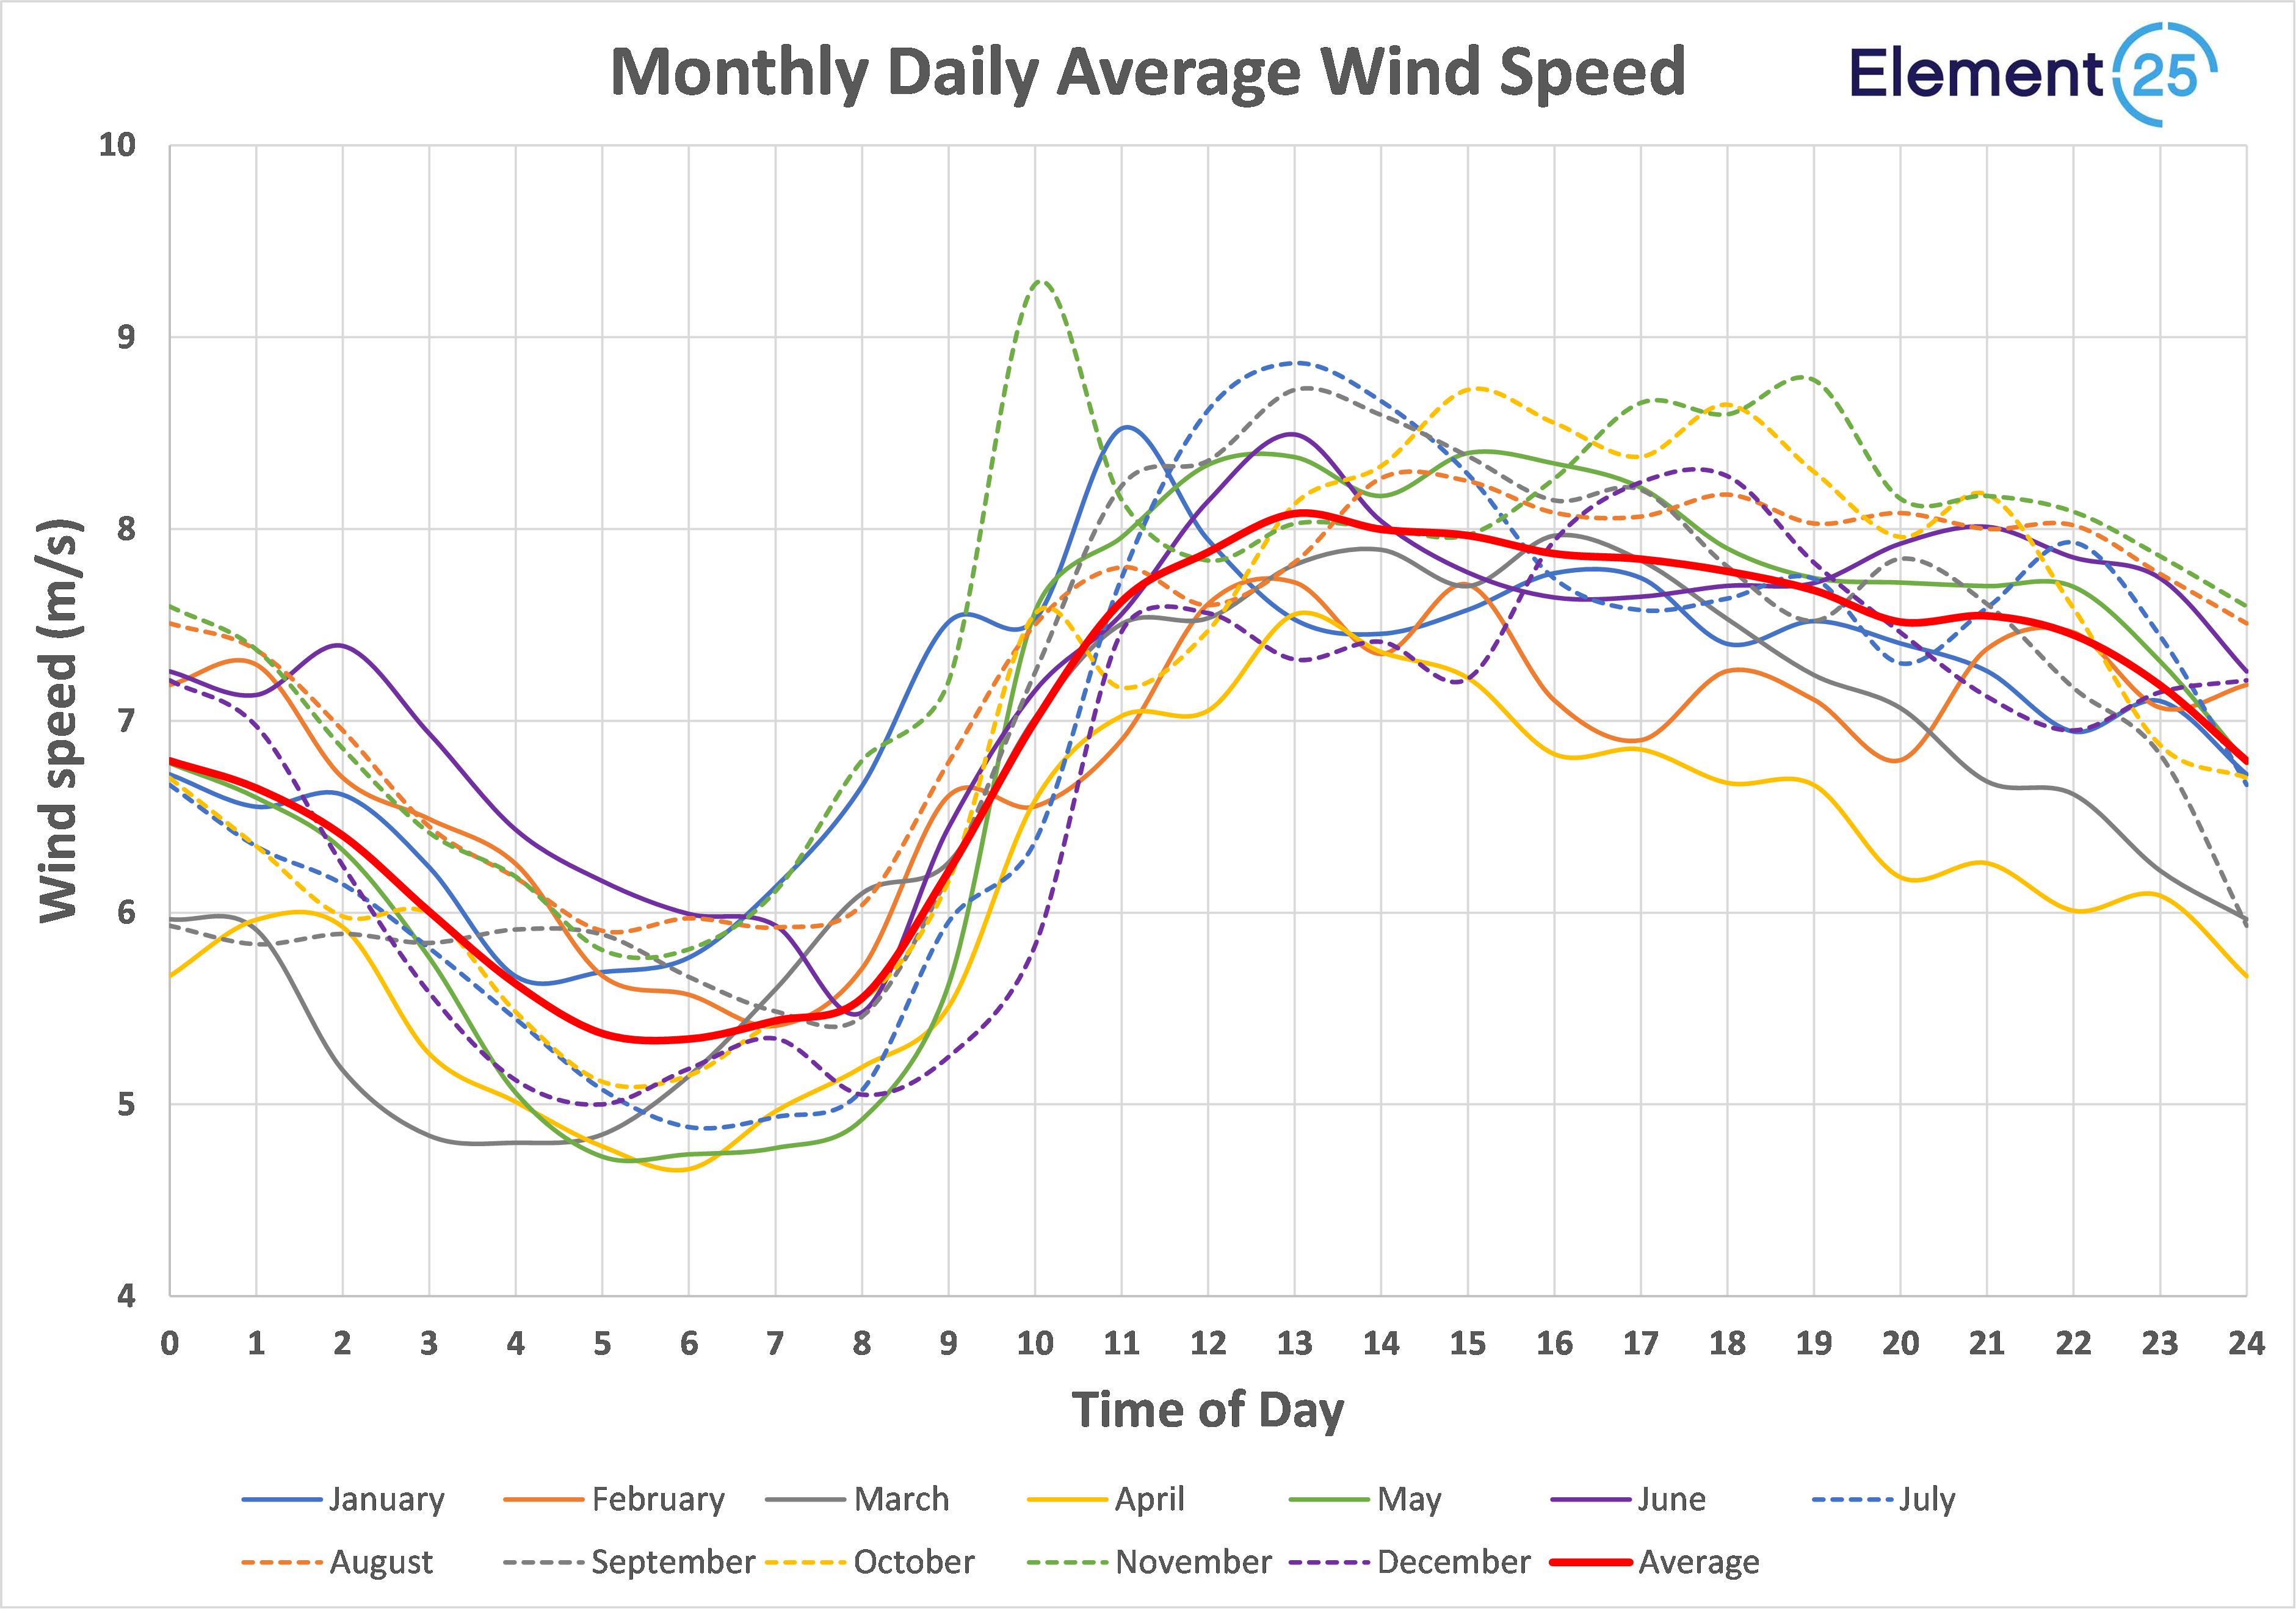 Figure 3: Butcherbird Average Wind Speed - Monthly Variability versus time of Day at 100m.